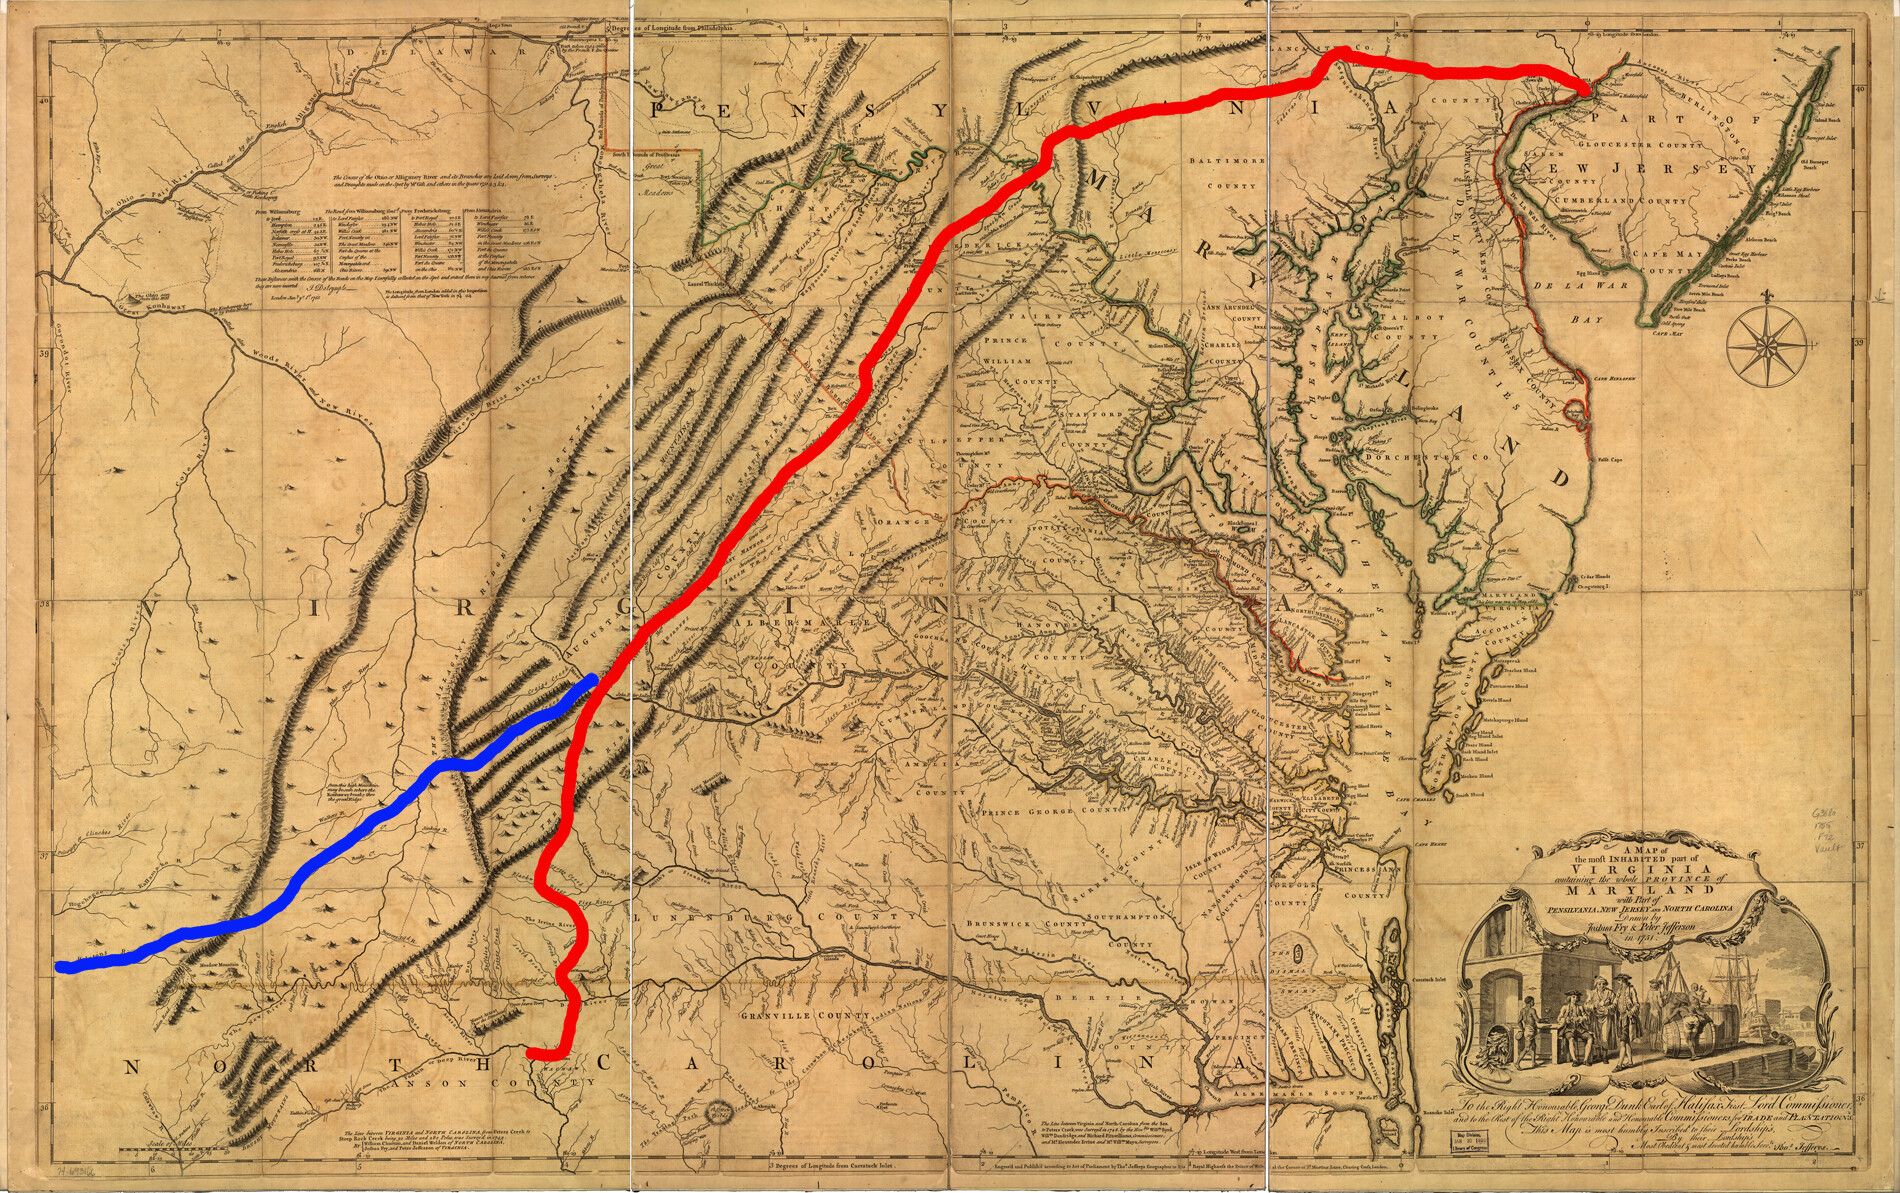 Fry & Jefferson Map from 1751 showing great wagon road